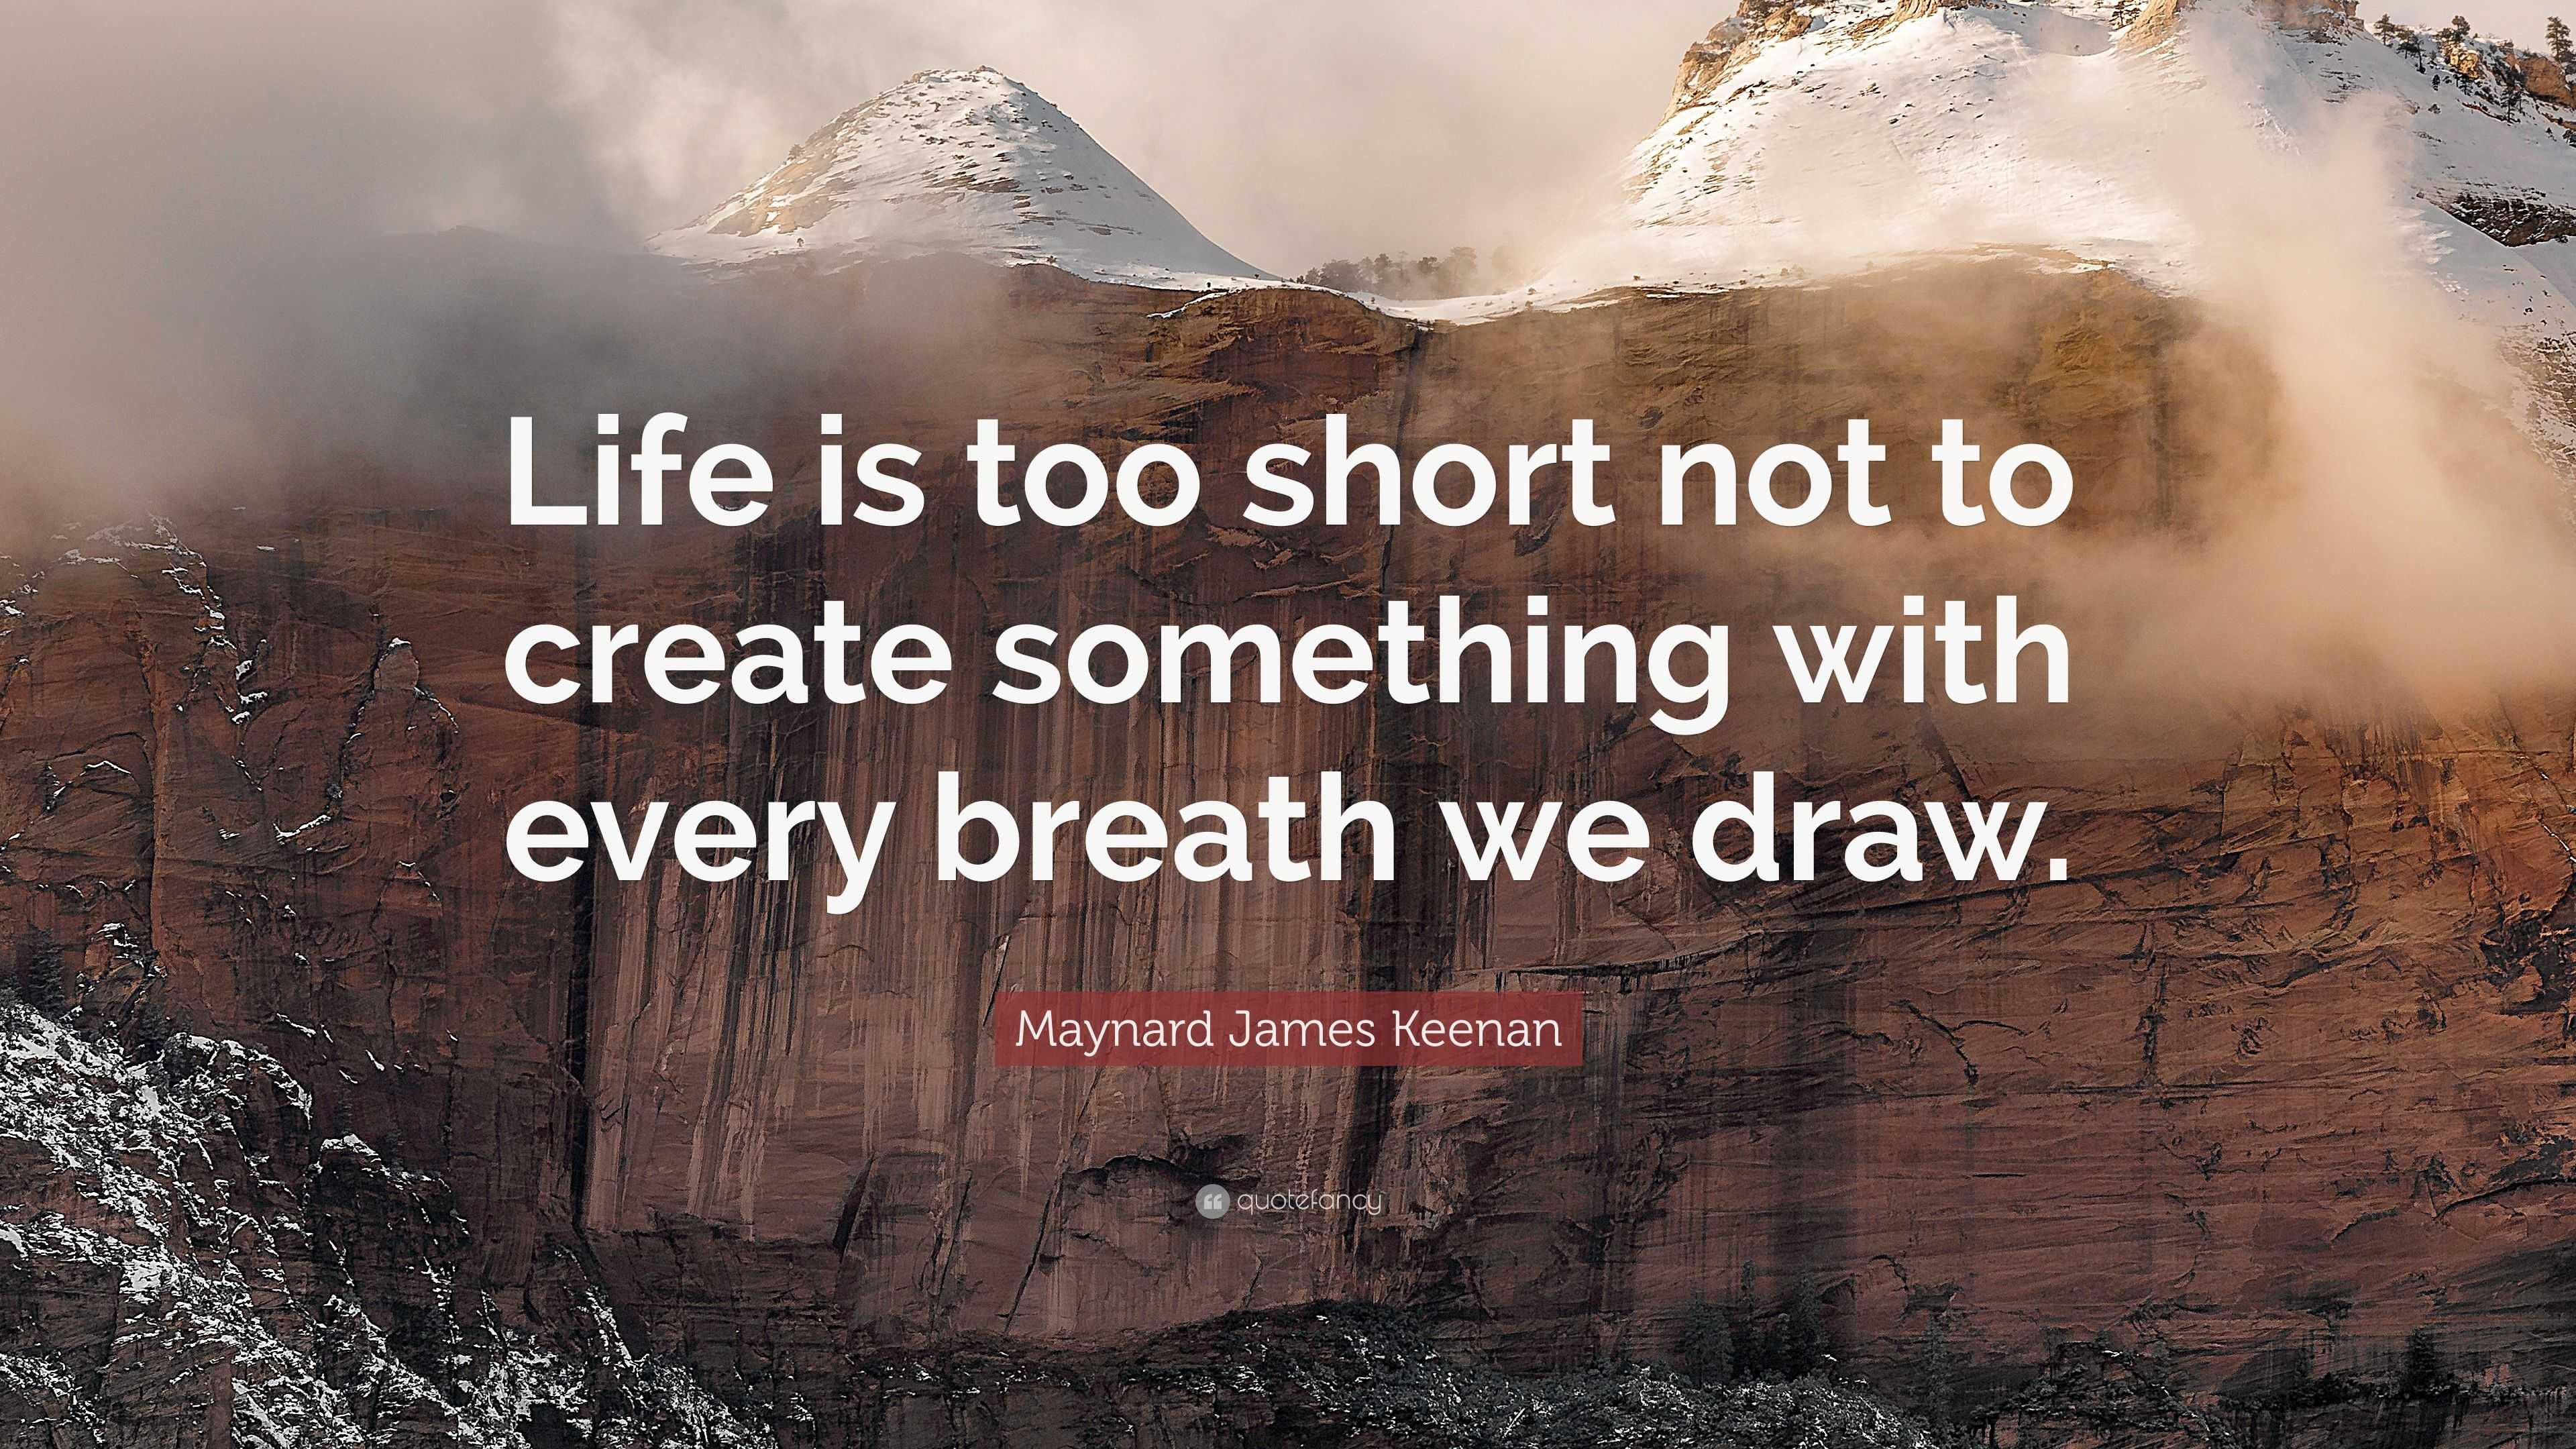 Maynard James Keenan Quote “Life is too short not to create something with every